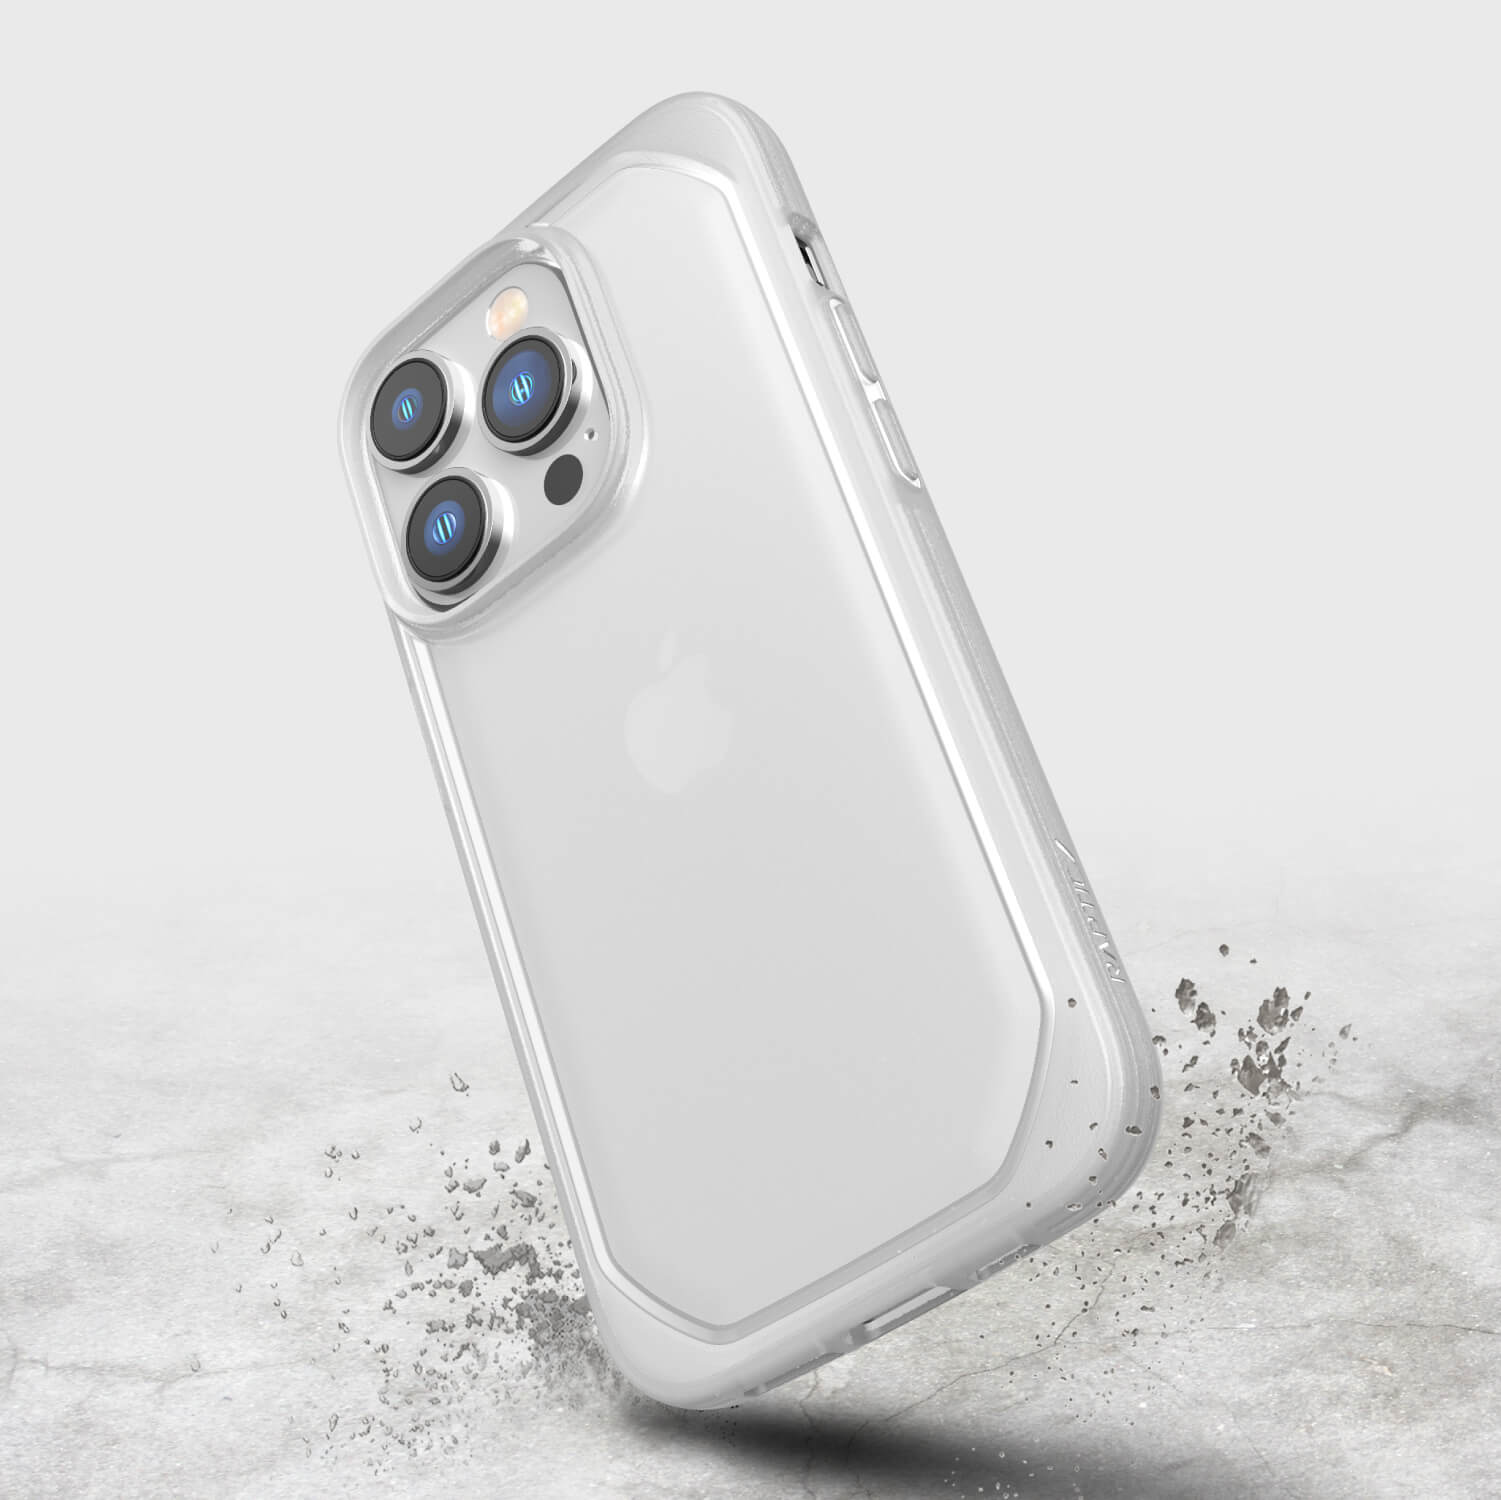 A white iPhone 14 Pro case - Raptic Slim & Sleek with texturing depth and recyclable materials.